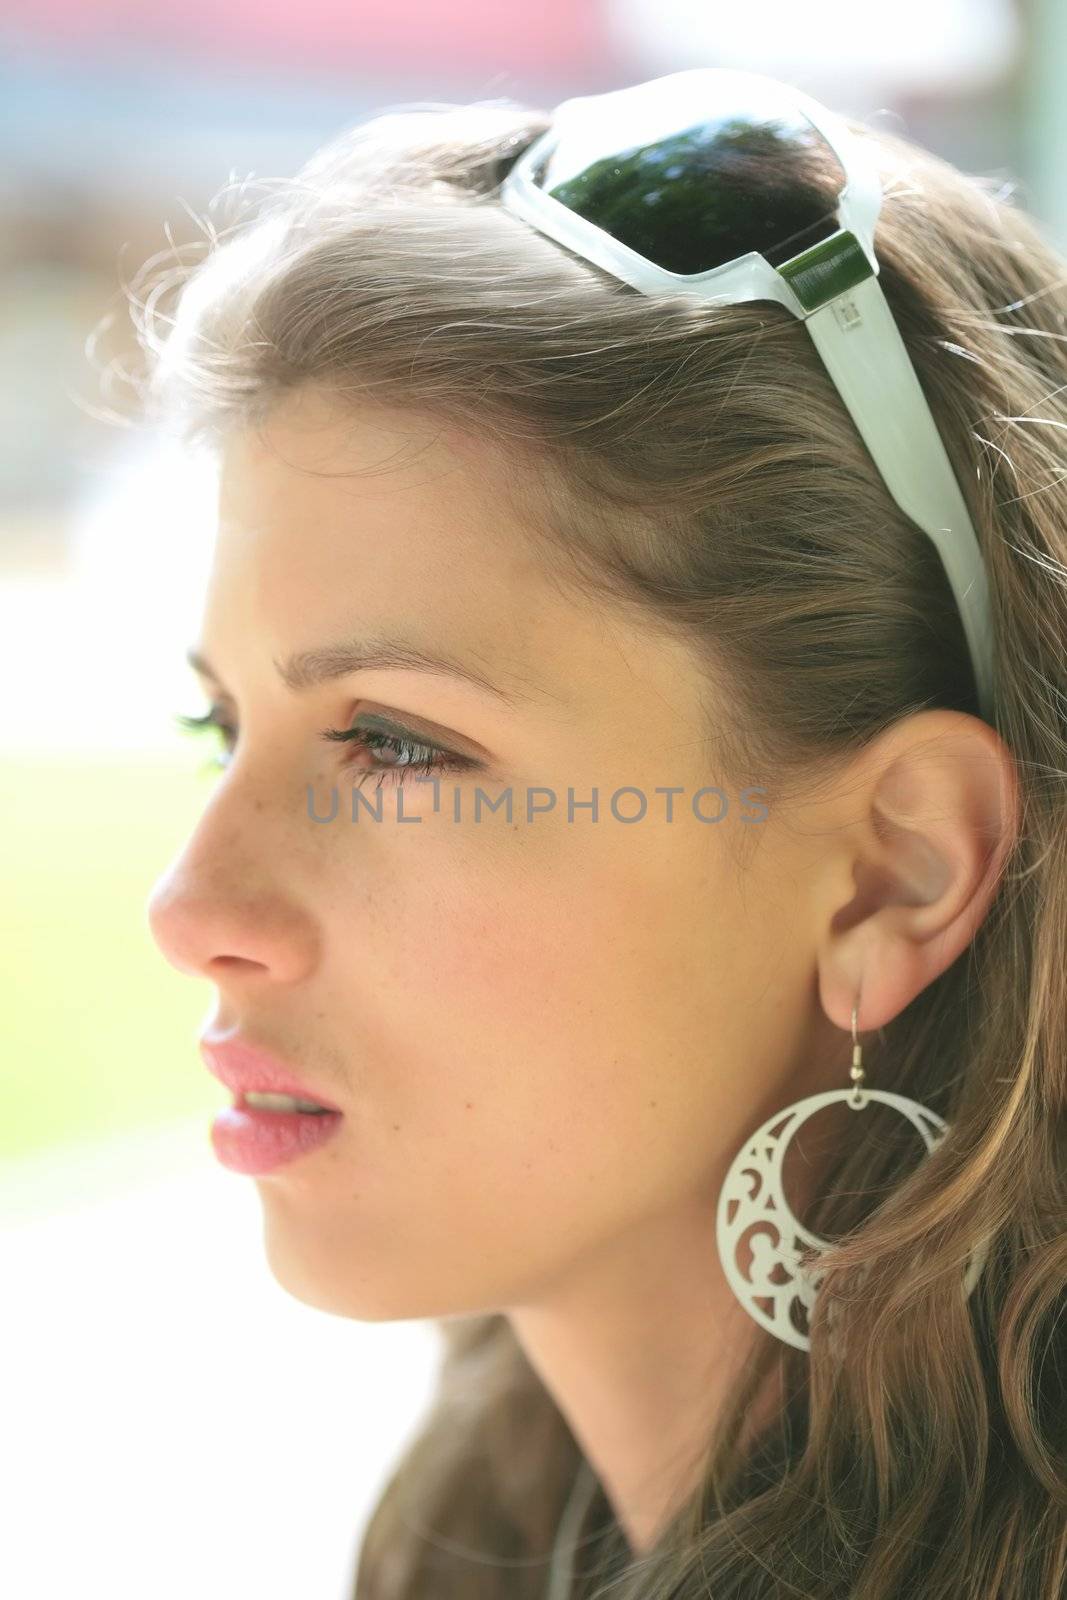 close-up portrait of the young beautiful woman with silver earring and sunglasses, profile